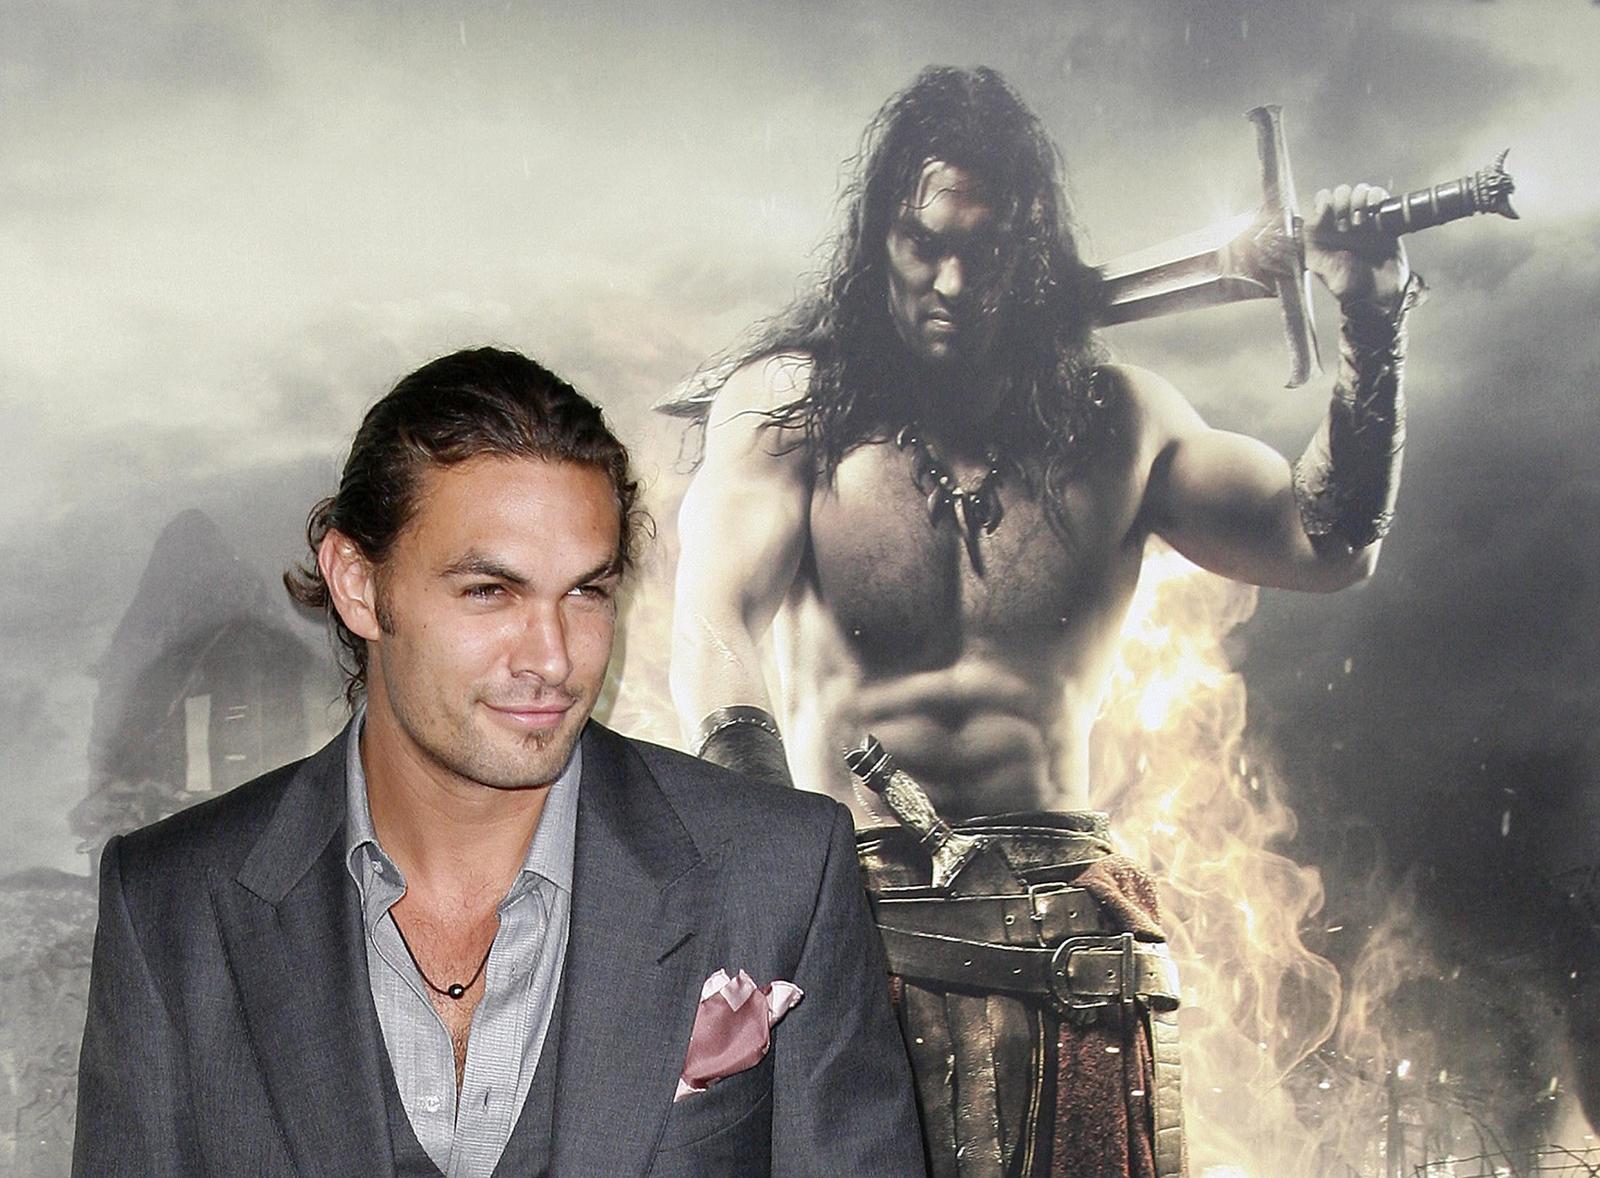 Cast member Jason Momoa arrives at the film premiere of “Conan the Barbarian” in Los Angeles, California